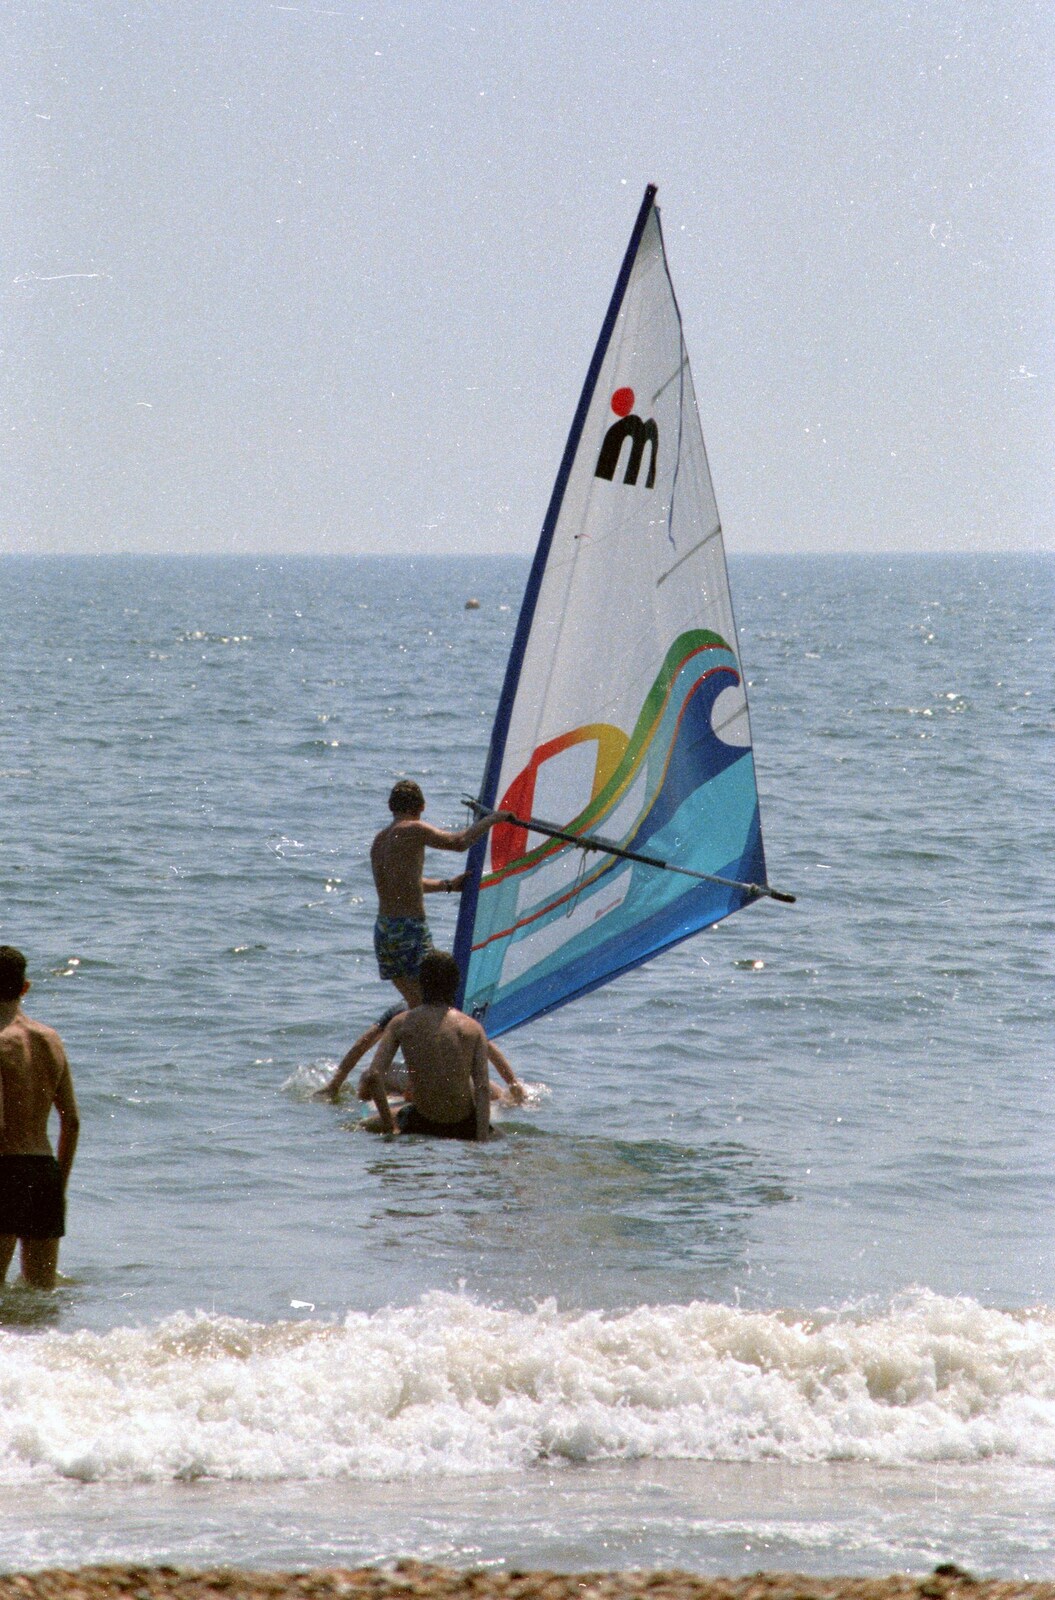 Windsurfing off Barton beach from A Ford Cottage Miscellany, Barton on Sea, Hampshire - 7th July 1986